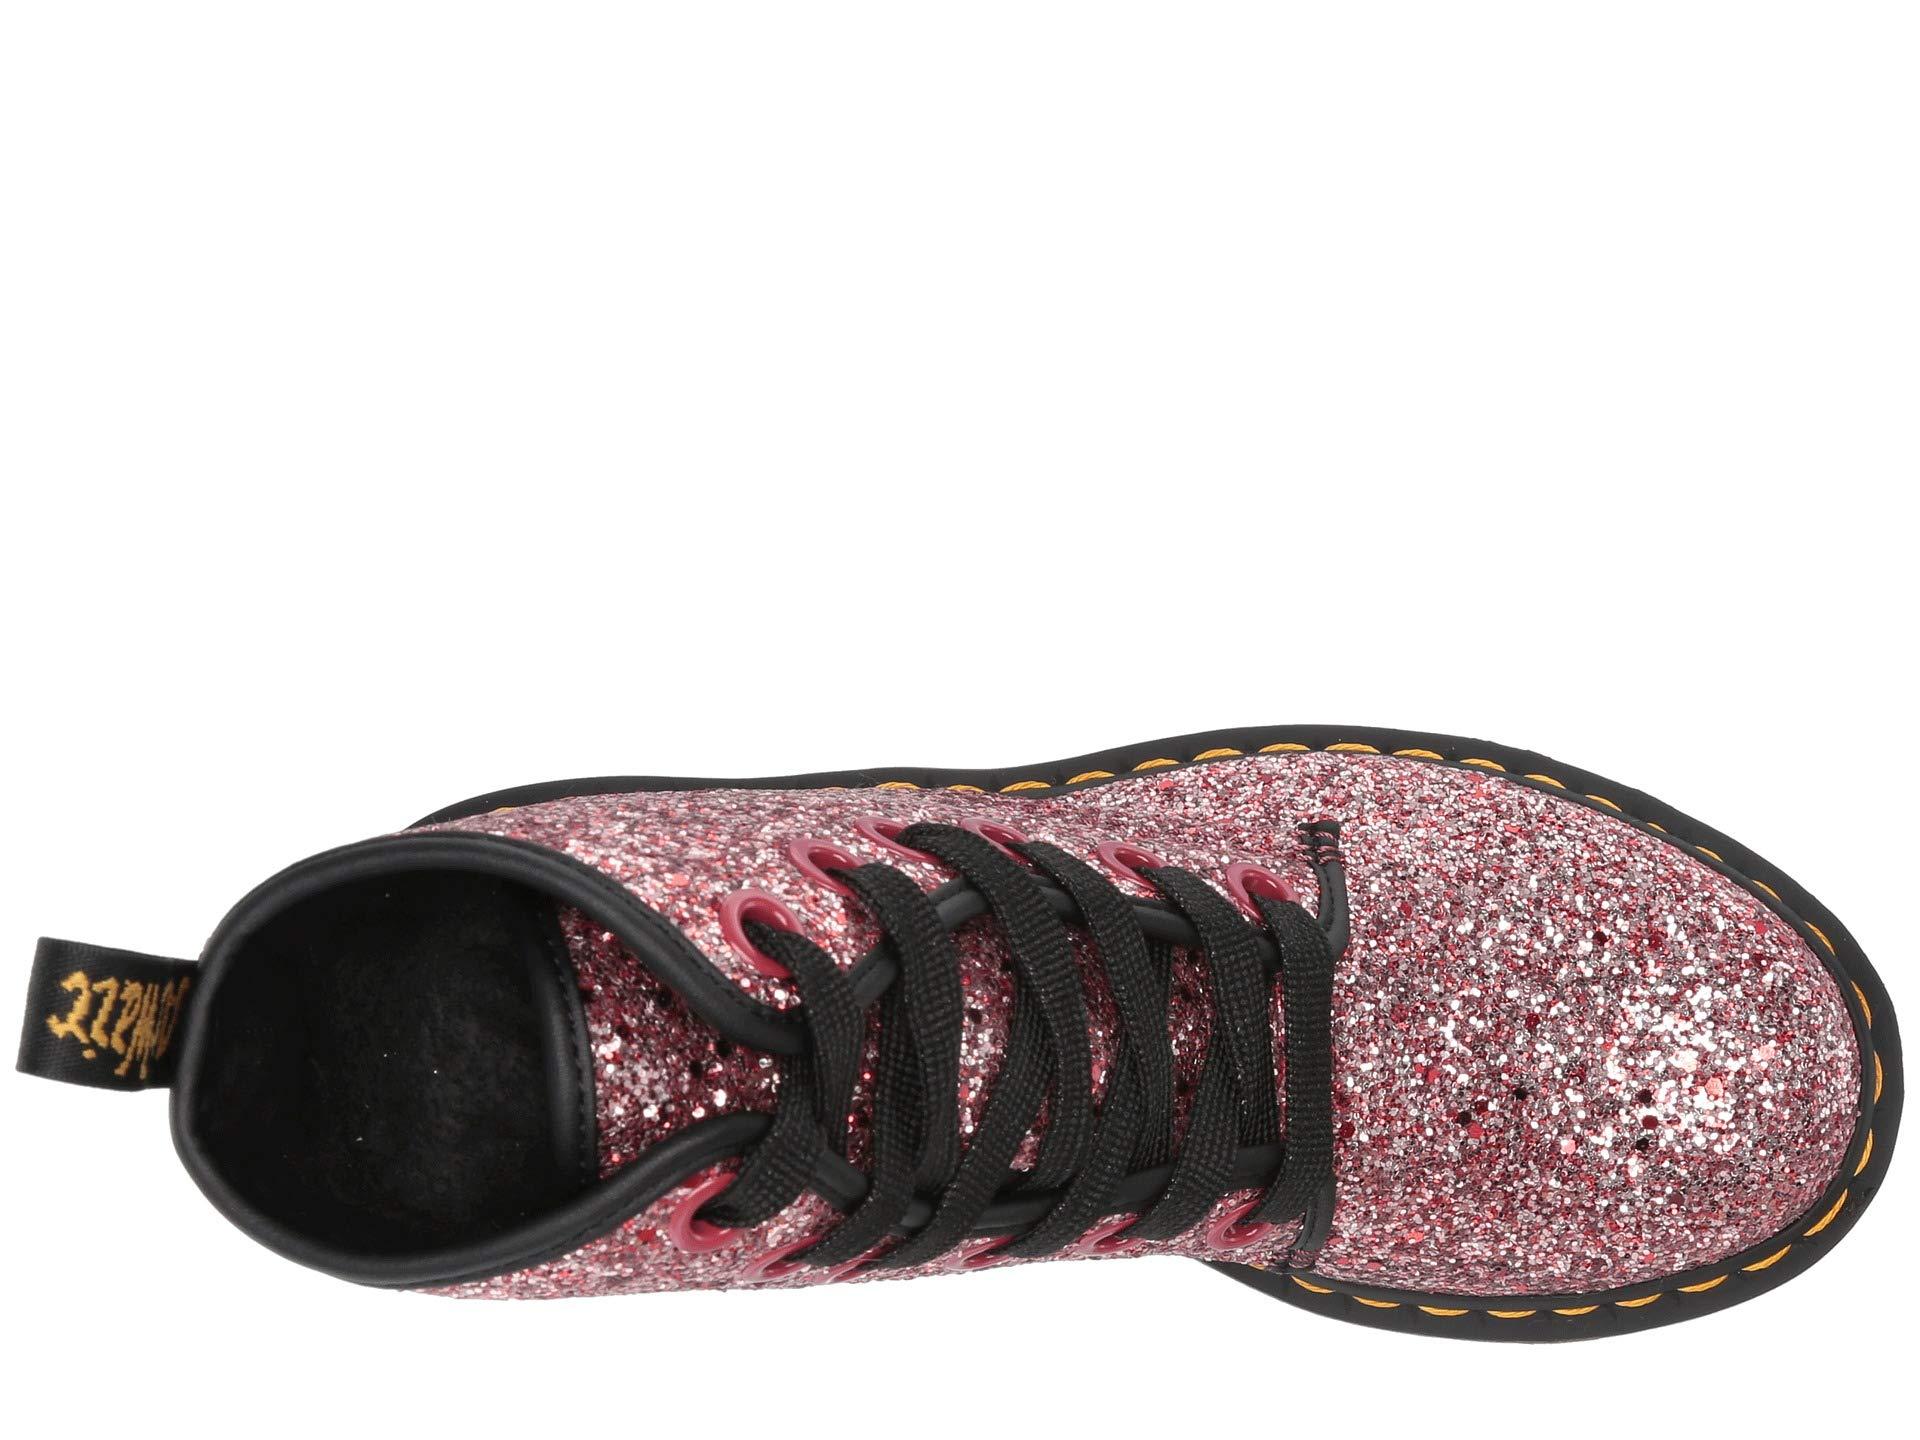 Dr. Martens S 1460 Farrah Chunky Glitter Festival Fashion Ankle Boots in  Pink | Lyst